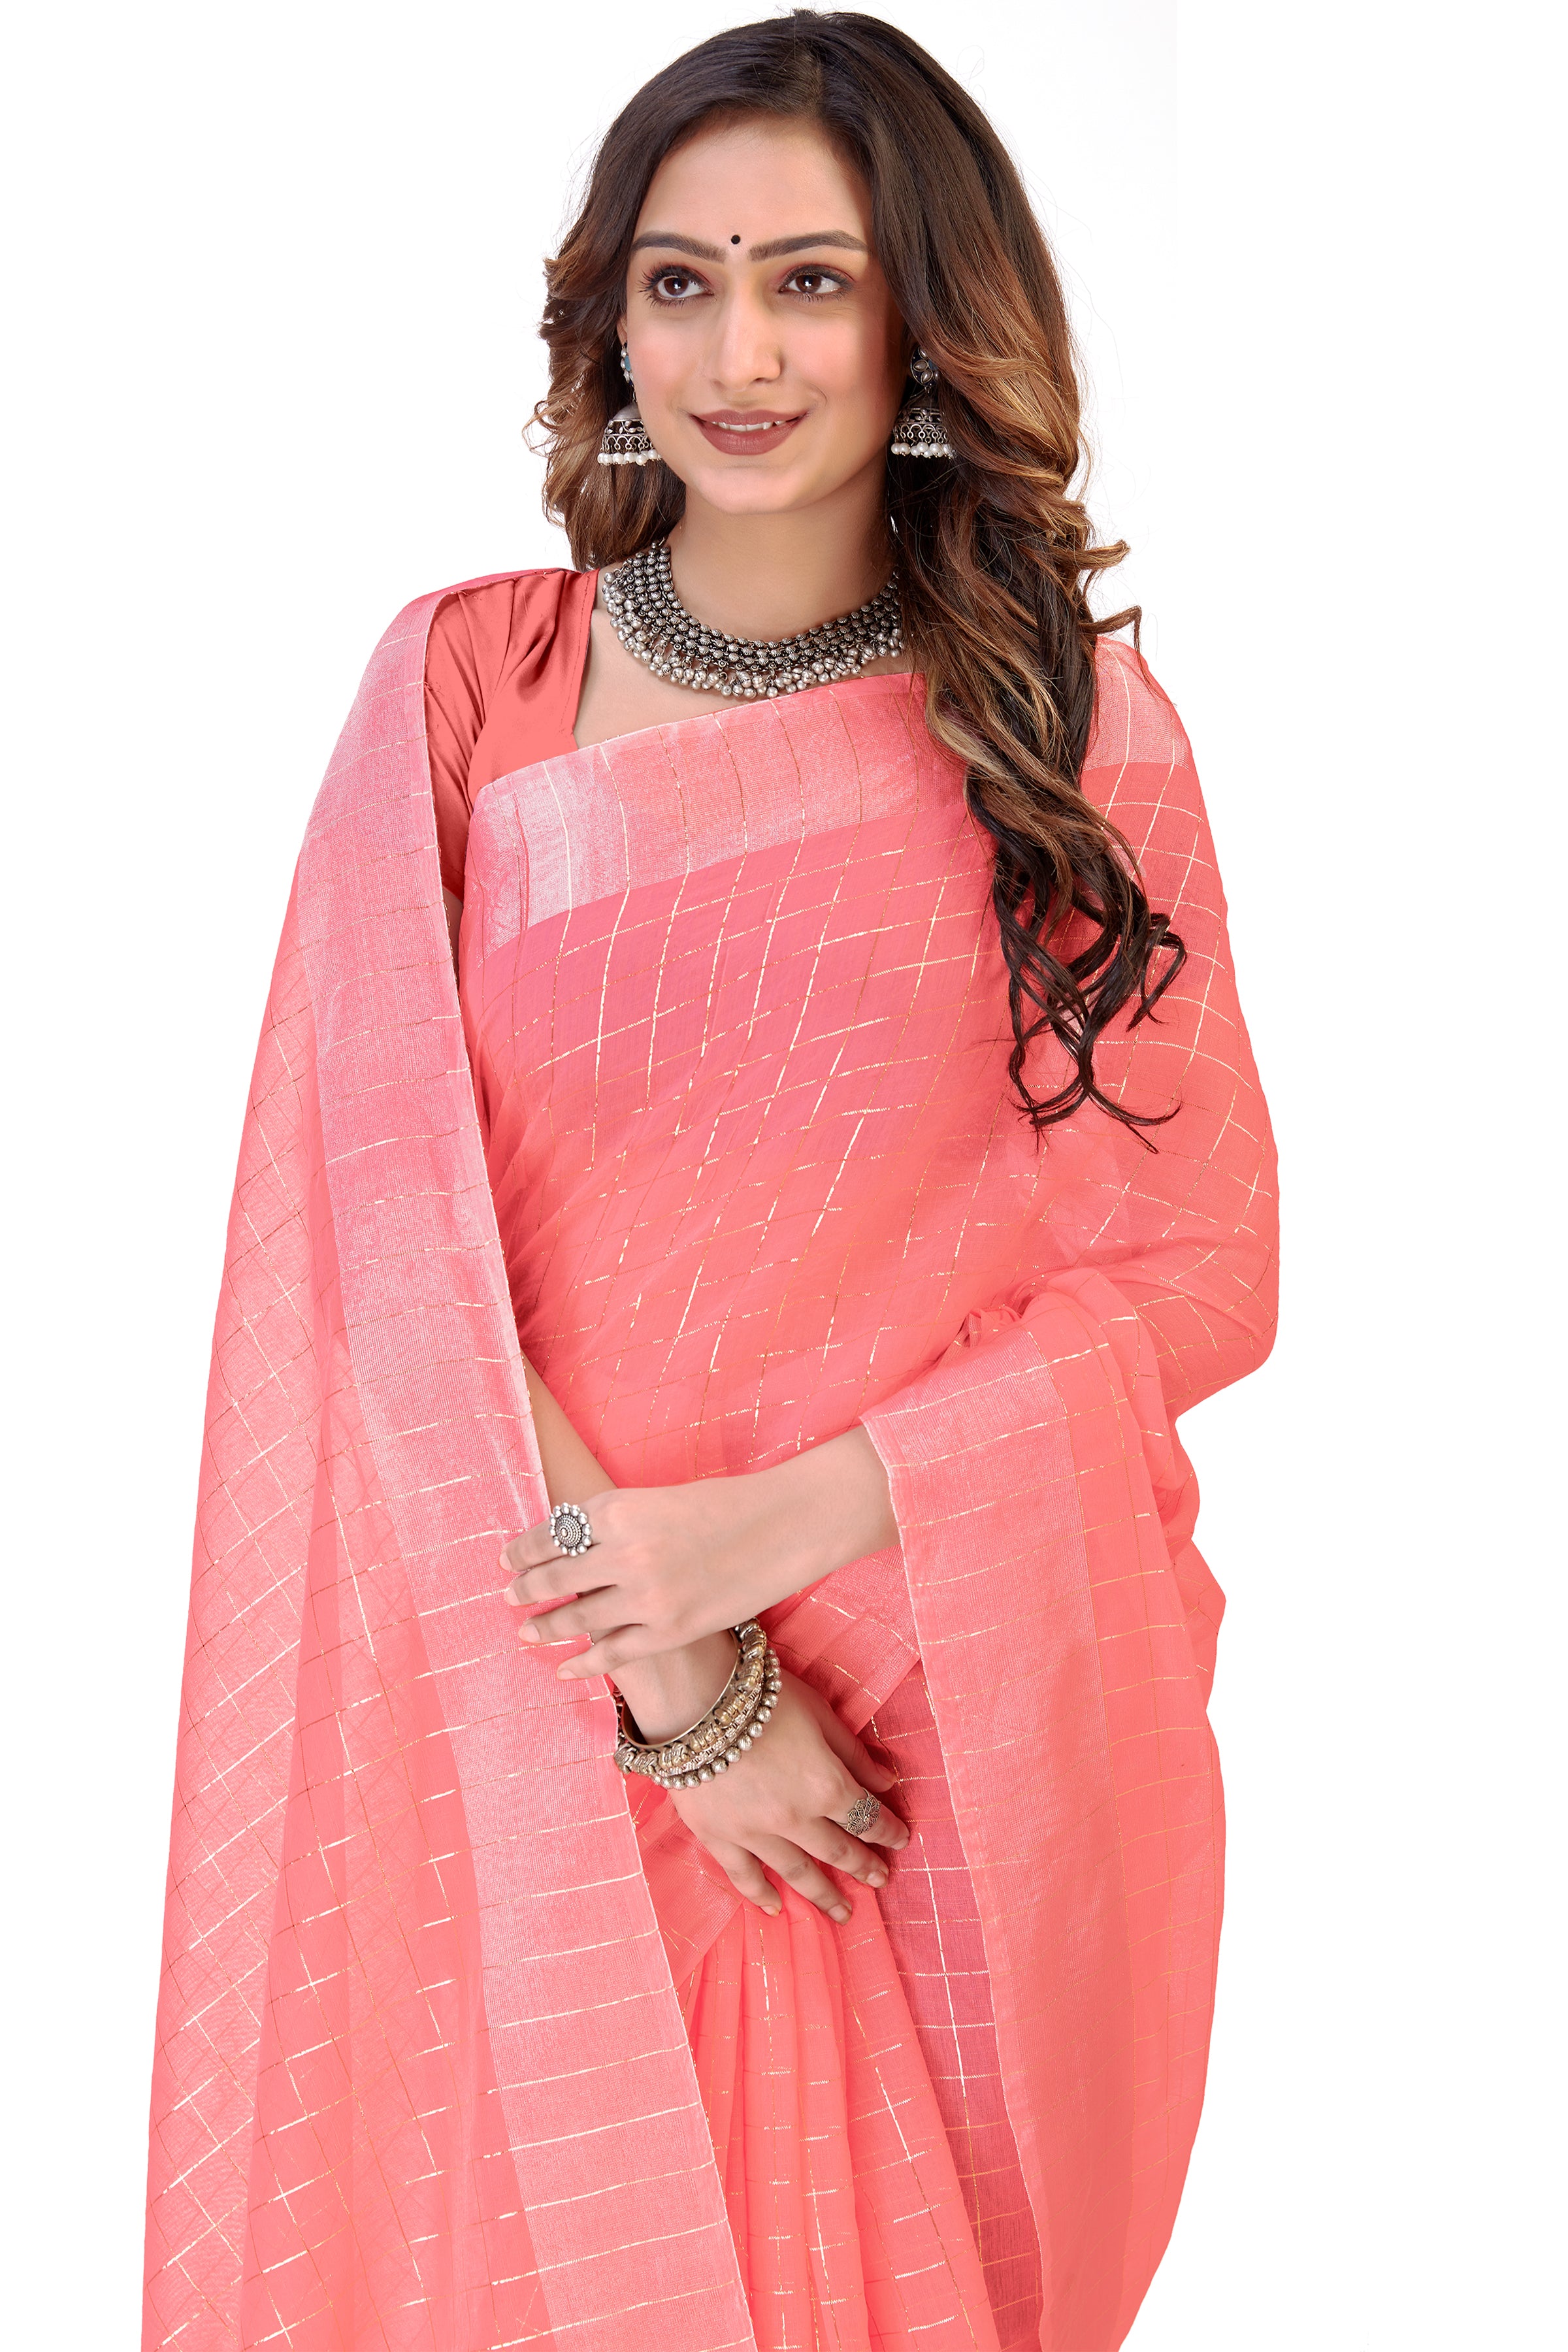 Women's self Woven Checked Daily Wear Cotton Blend Sari With Blouse Piece (Baby Pink) - NIMIDHYA